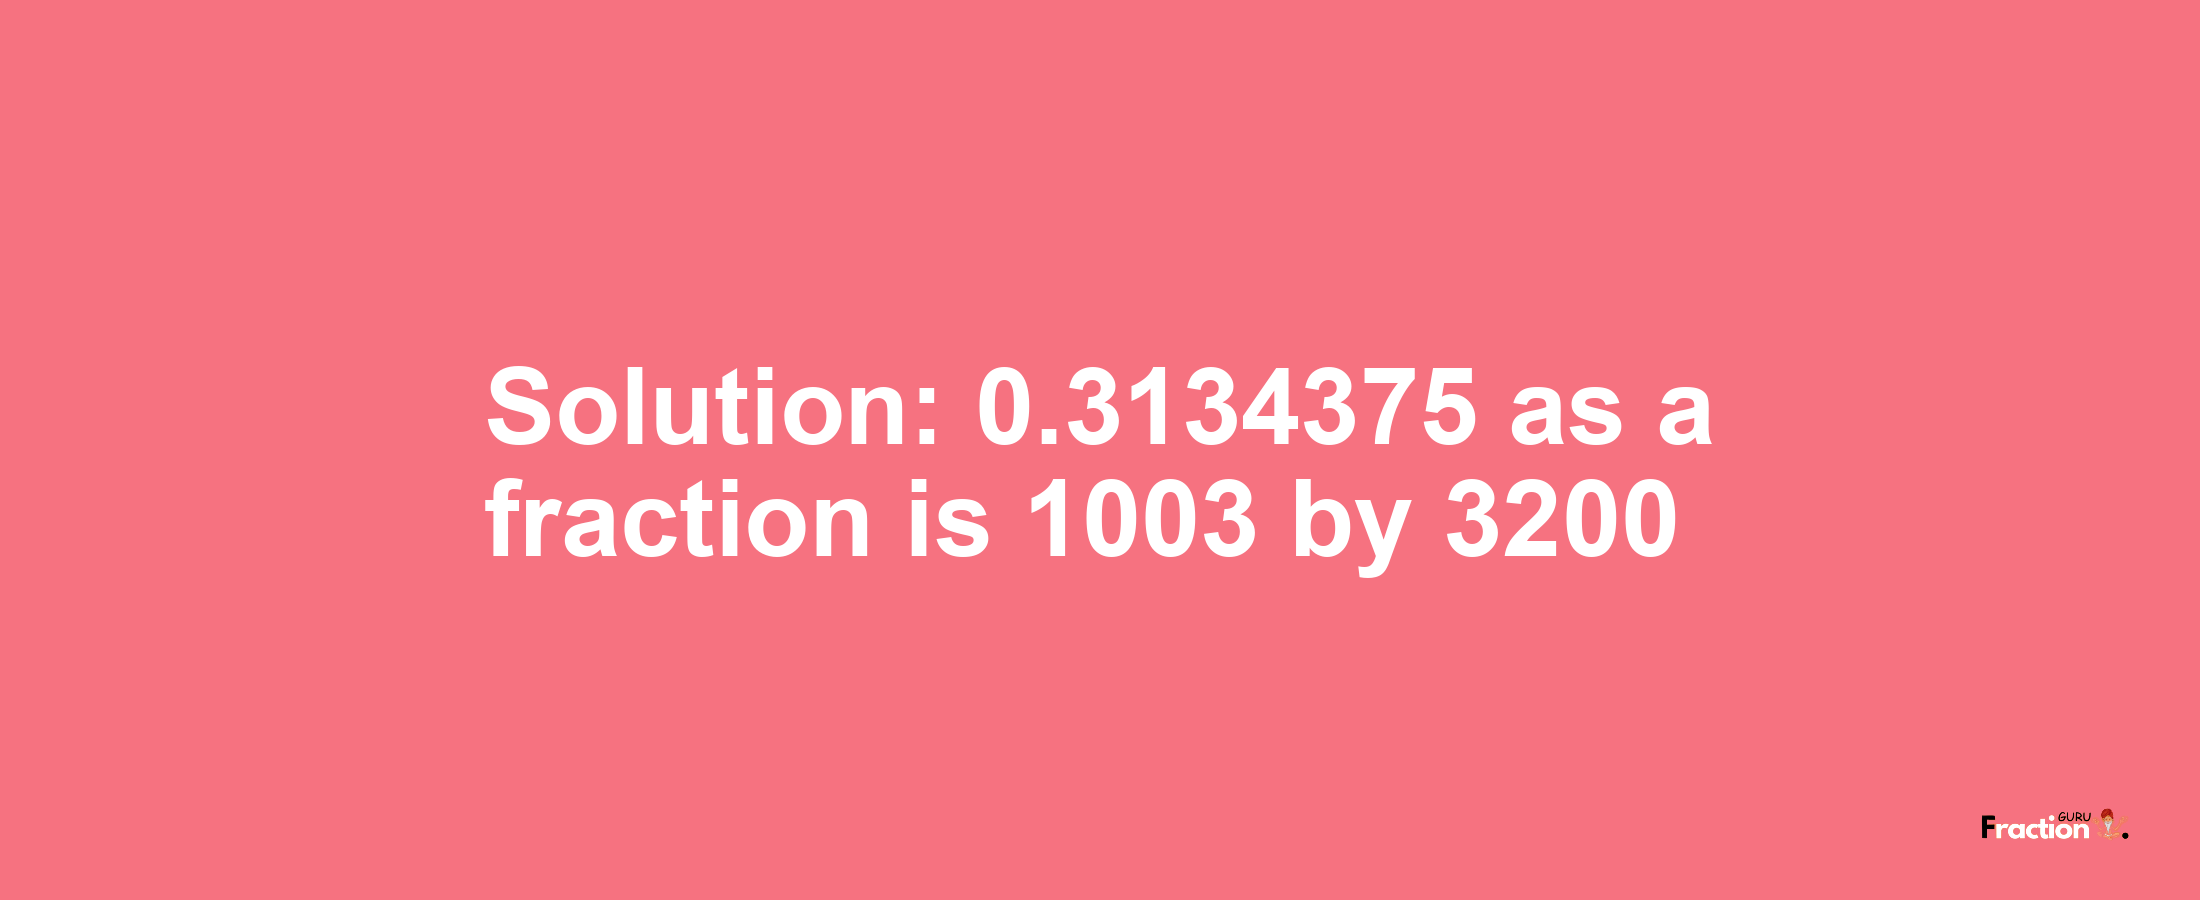 Solution:0.3134375 as a fraction is 1003/3200